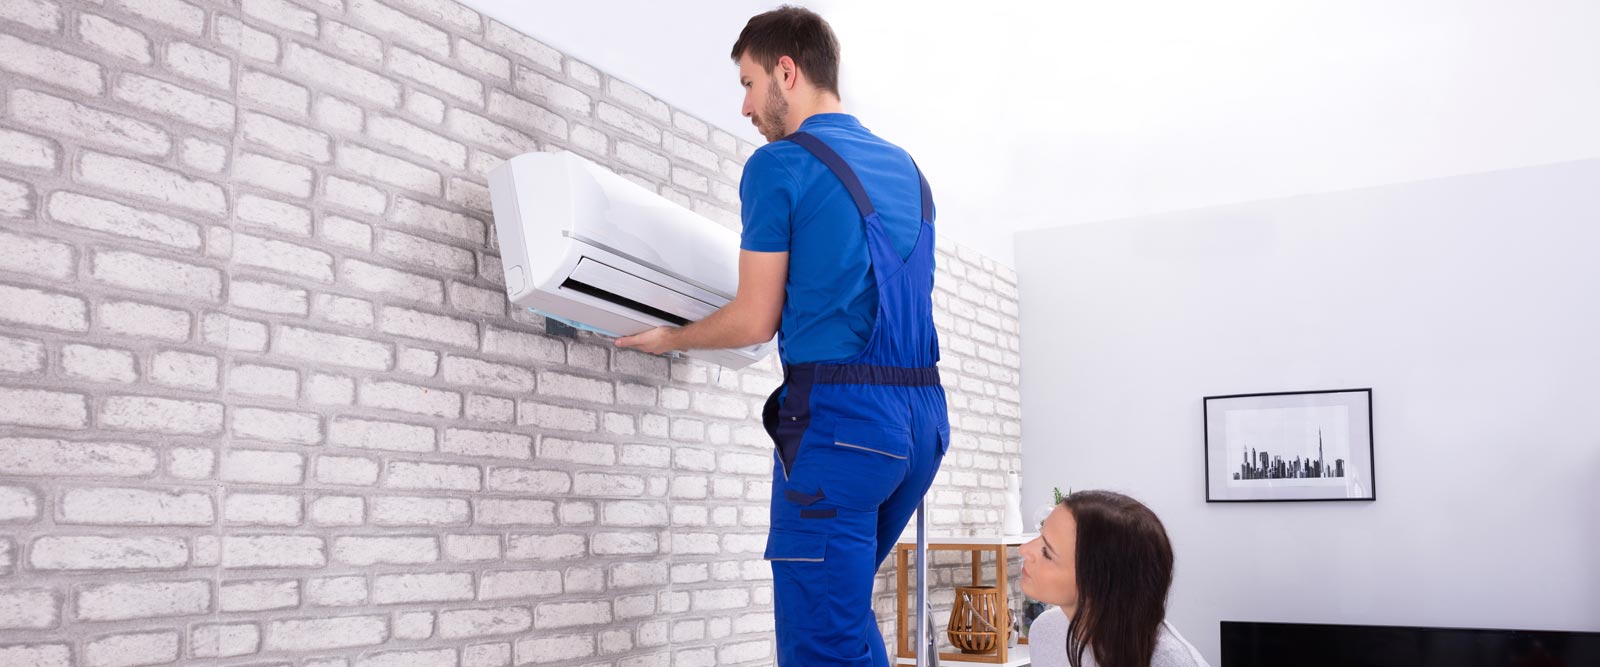 Top 5 AC Installation Tips for Homeowners